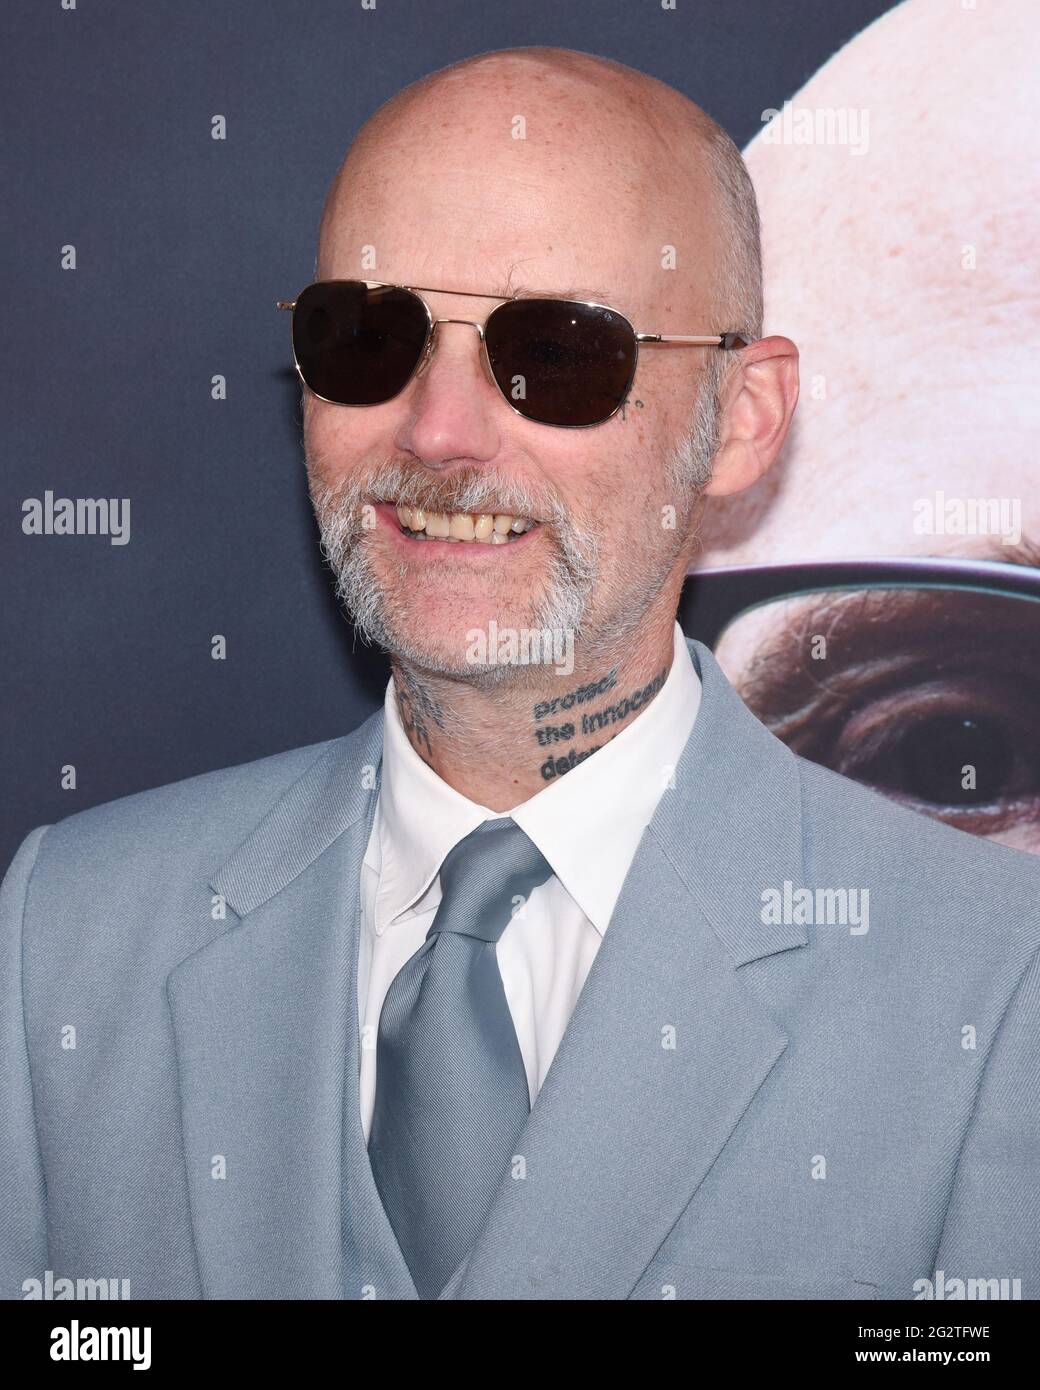 June 11, 2021, Hollywood, Clalifornia, USA: Moby attends Moby Inaugural performer of NeueHouse's Summer 2021 Concert Series ''Sunset Sounds' (Credit Image: © Billy Bennight/ZUMA Wire) Stock Photo